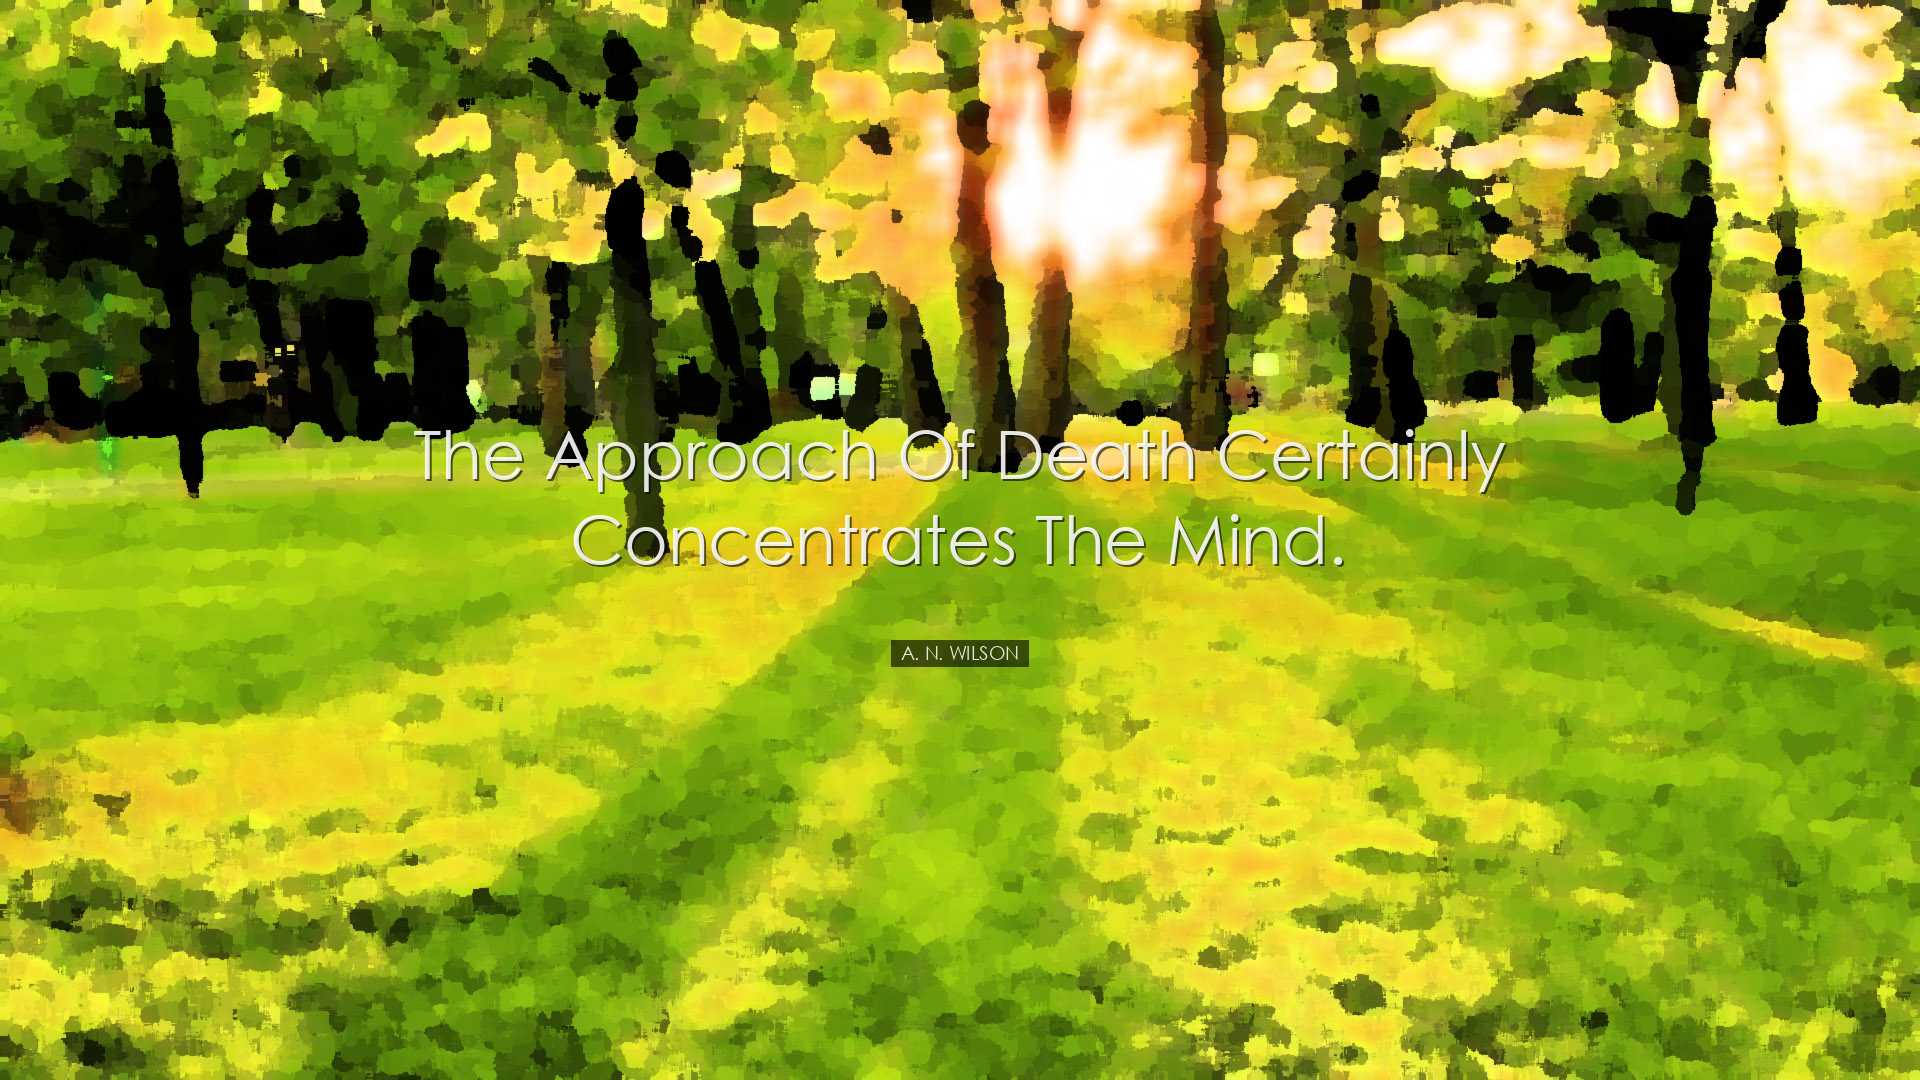 The approach of death certainly concentrates the mind. - A. N. Wil